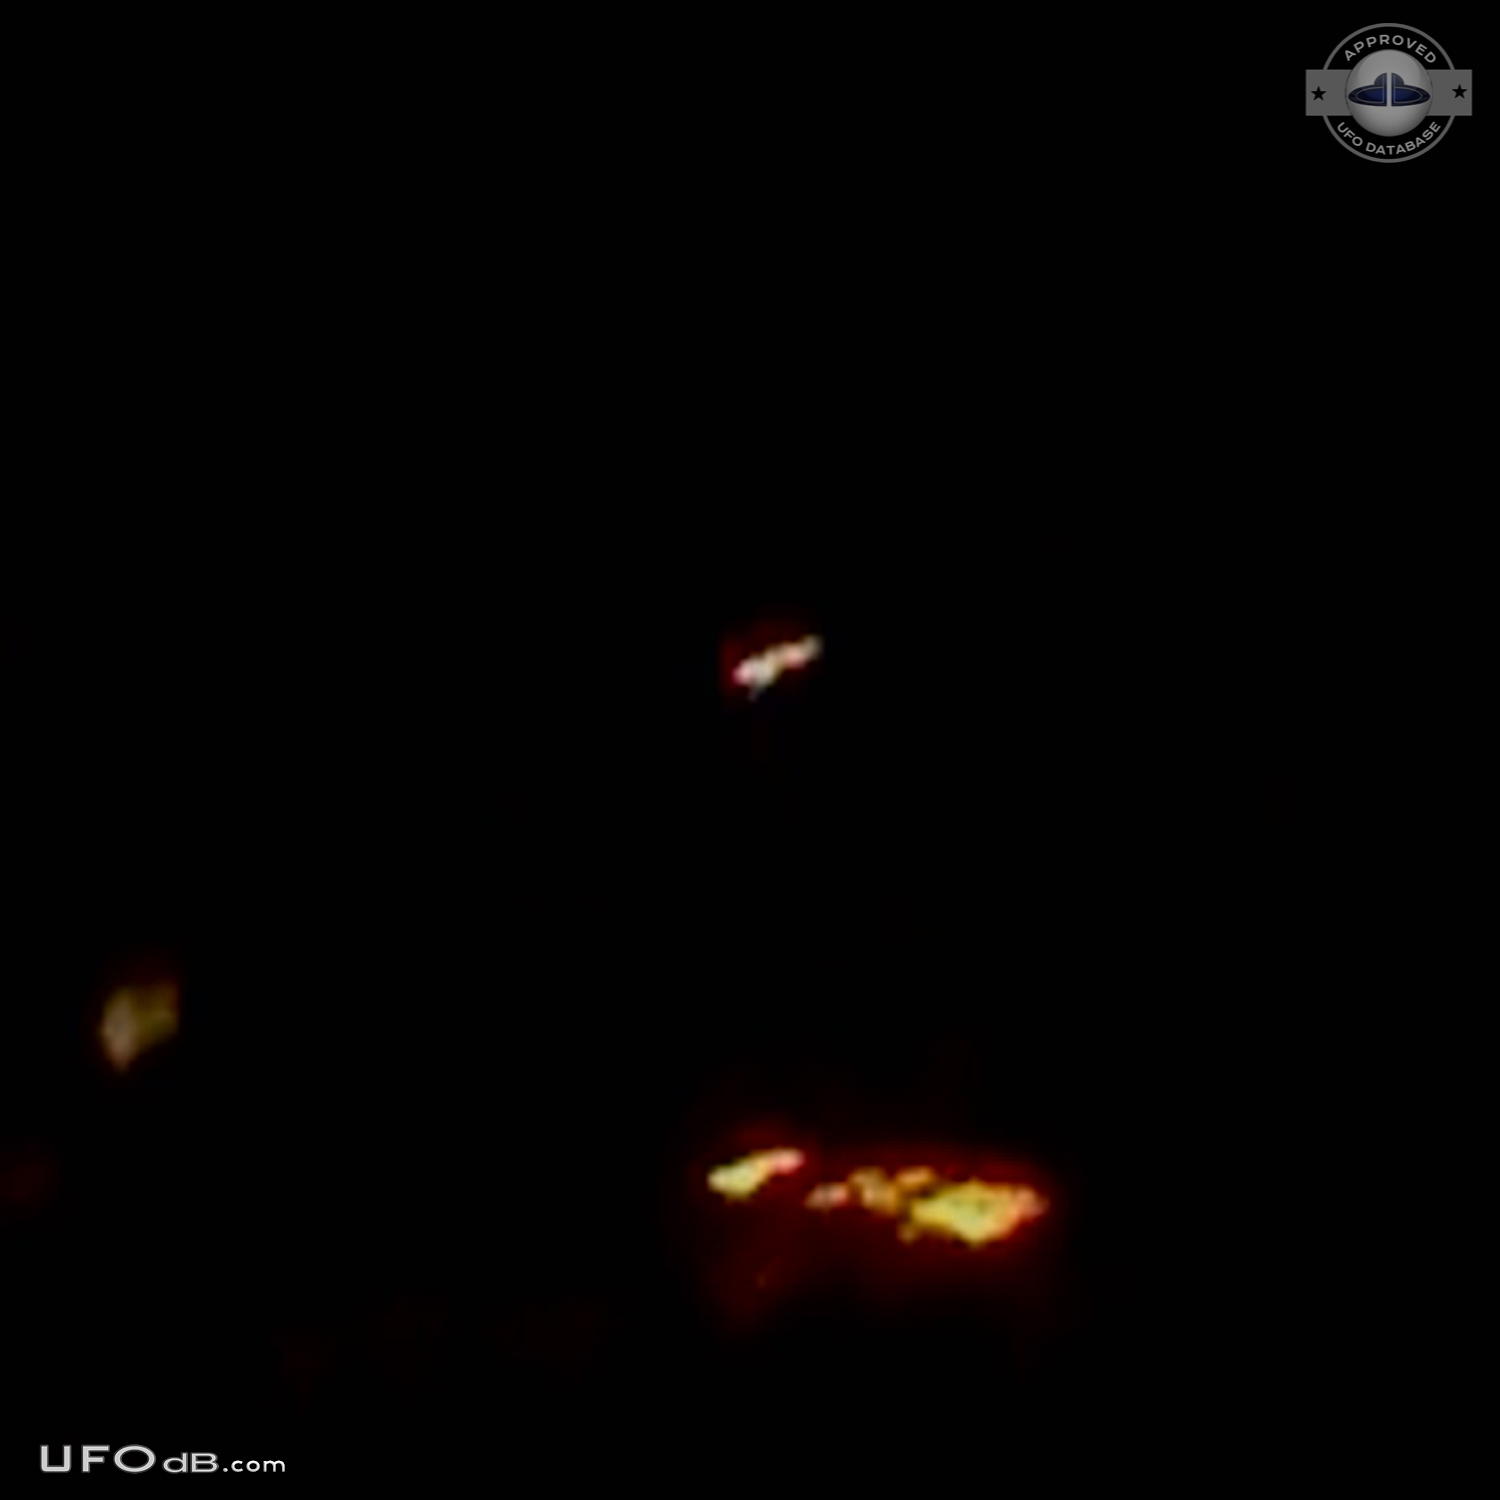 Extremely bright and beautiful UFOs seen in San Jose, California 2012 UFO Picture #537-2